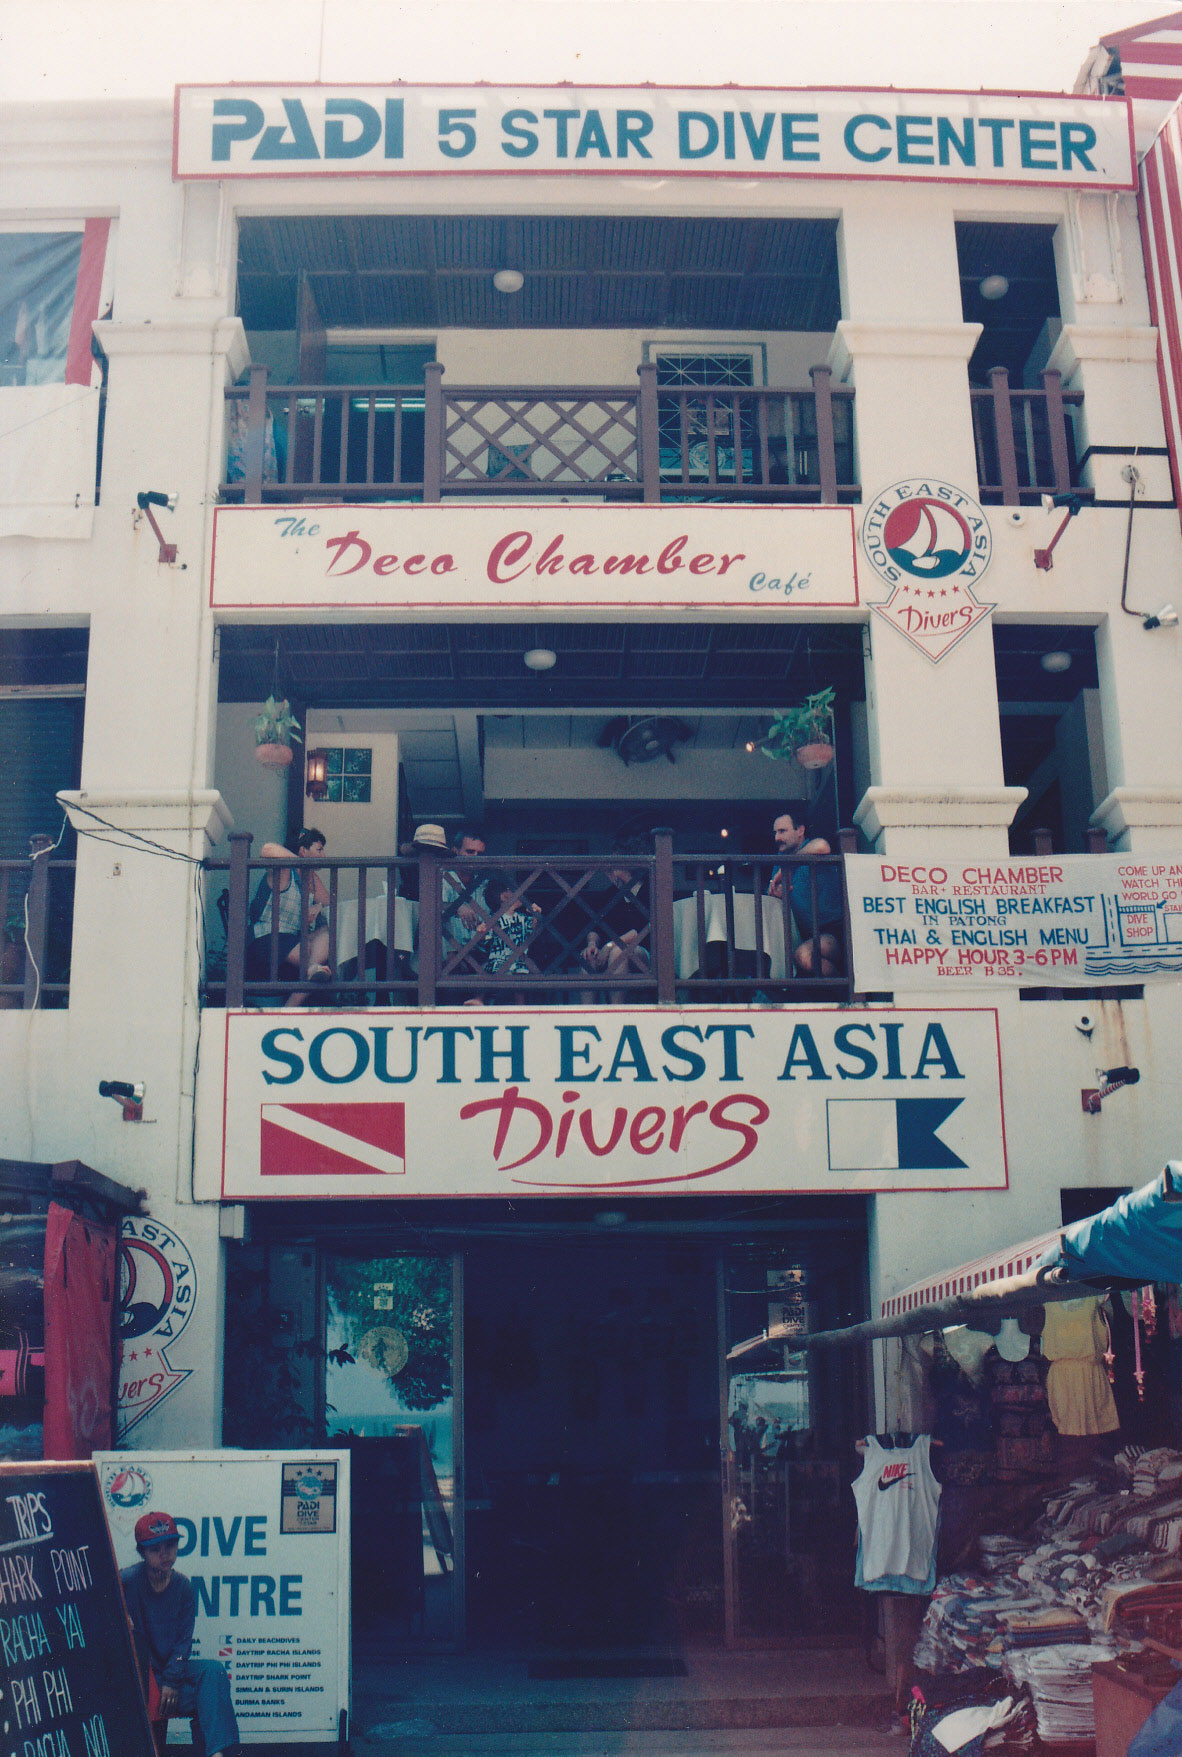 South East Asia Divers Headoffice in Patong